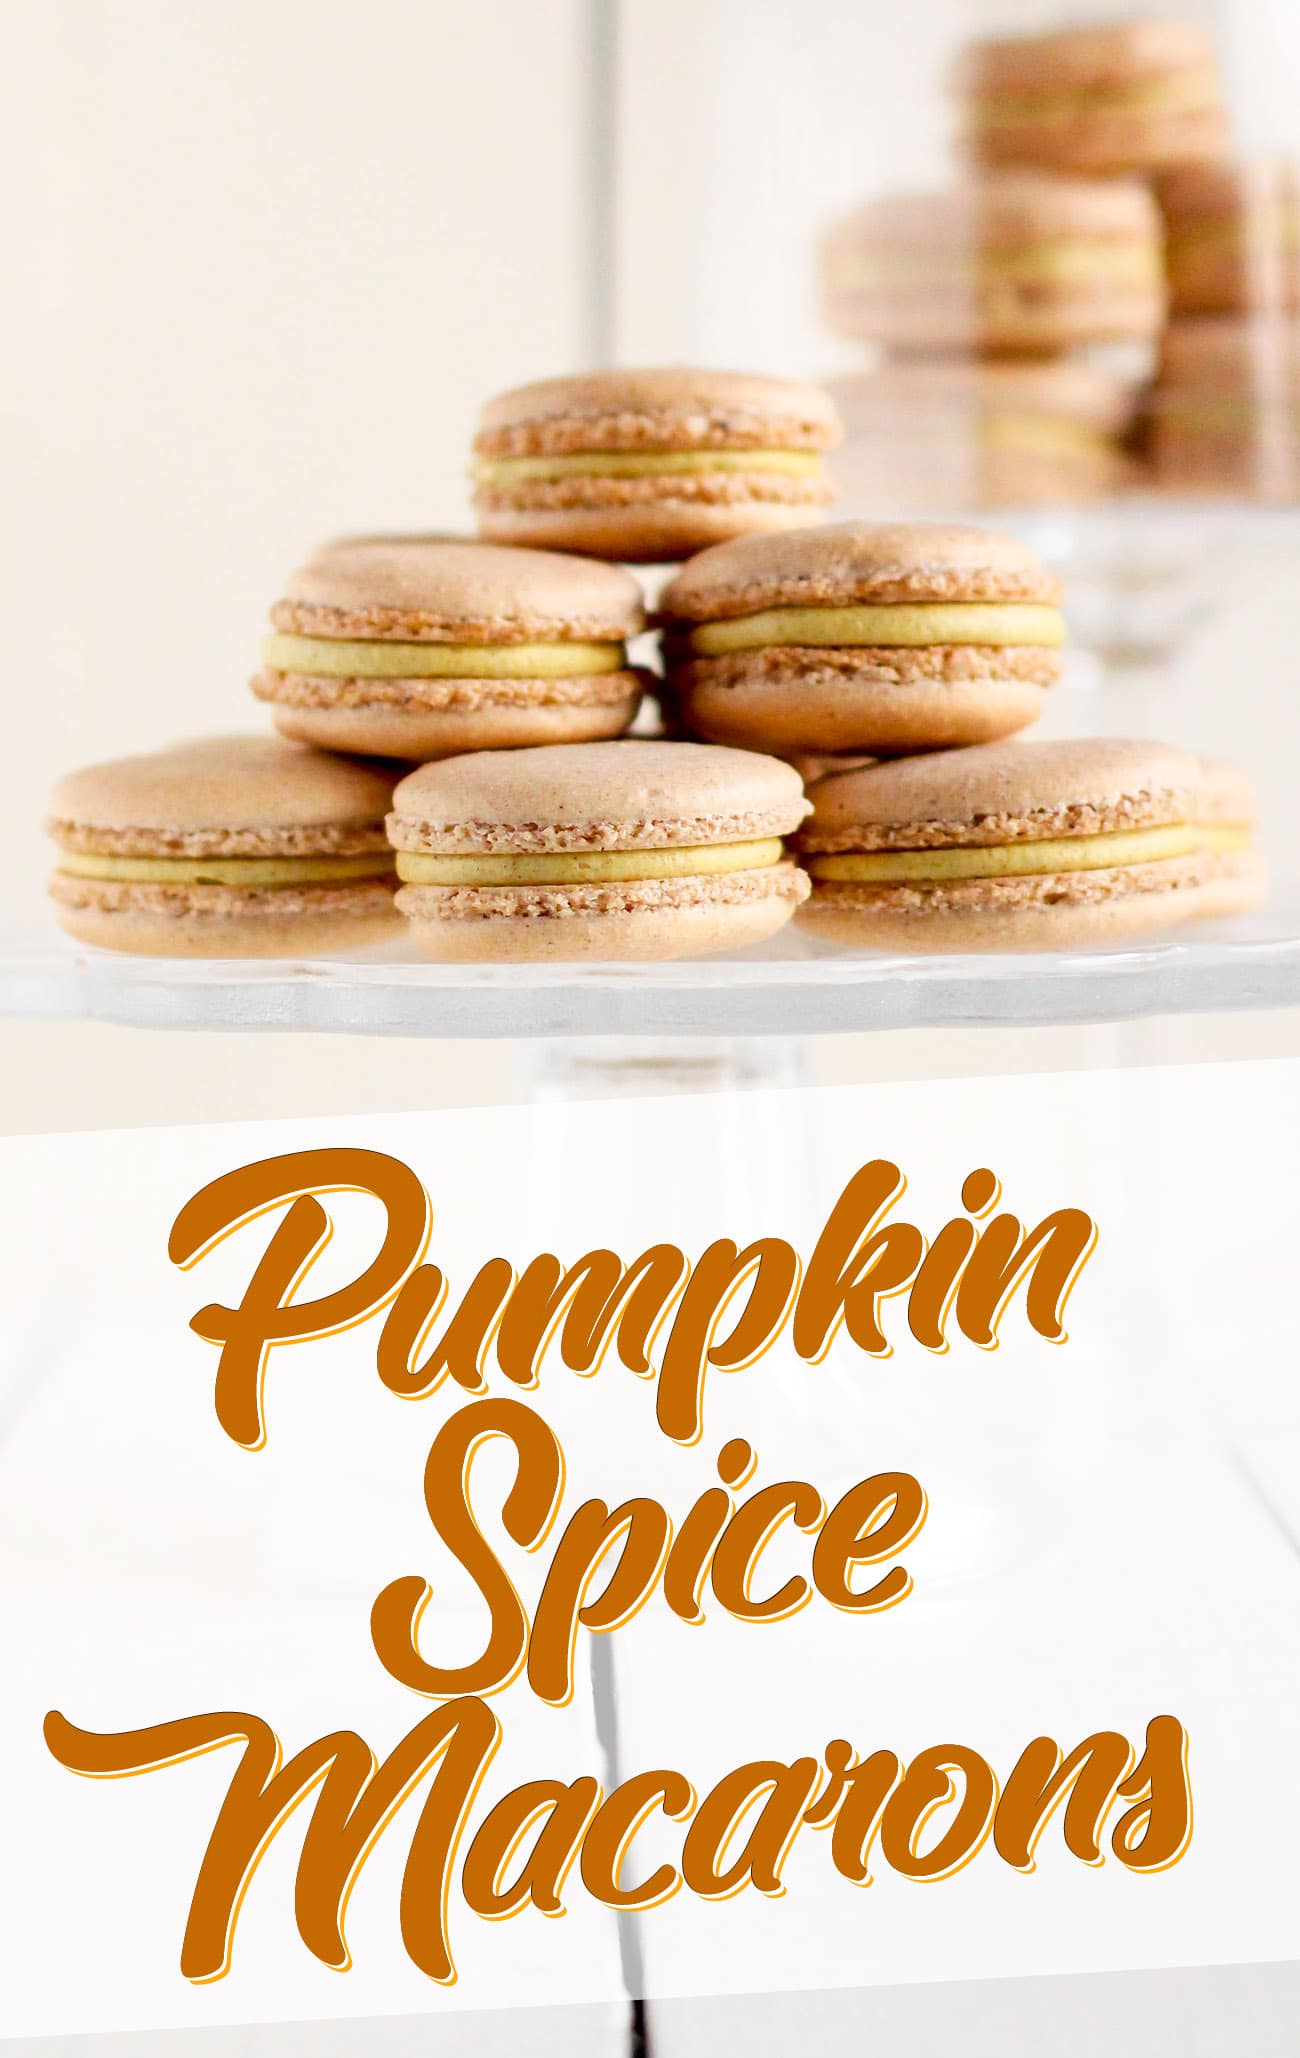 These Pumpkin Spice French Macarons are naturally orange and perfectly sweet and spicy, thanks to the cinnamon, ginger, nutmeg, and cloves! Unlike most macarons, which are made with bleached sugar and artificial flavors, these are all natural and gluten free! #pumpkinpiespice #frenchmacarons #macarons #glutenfree #glutenfreemacarons #healthier